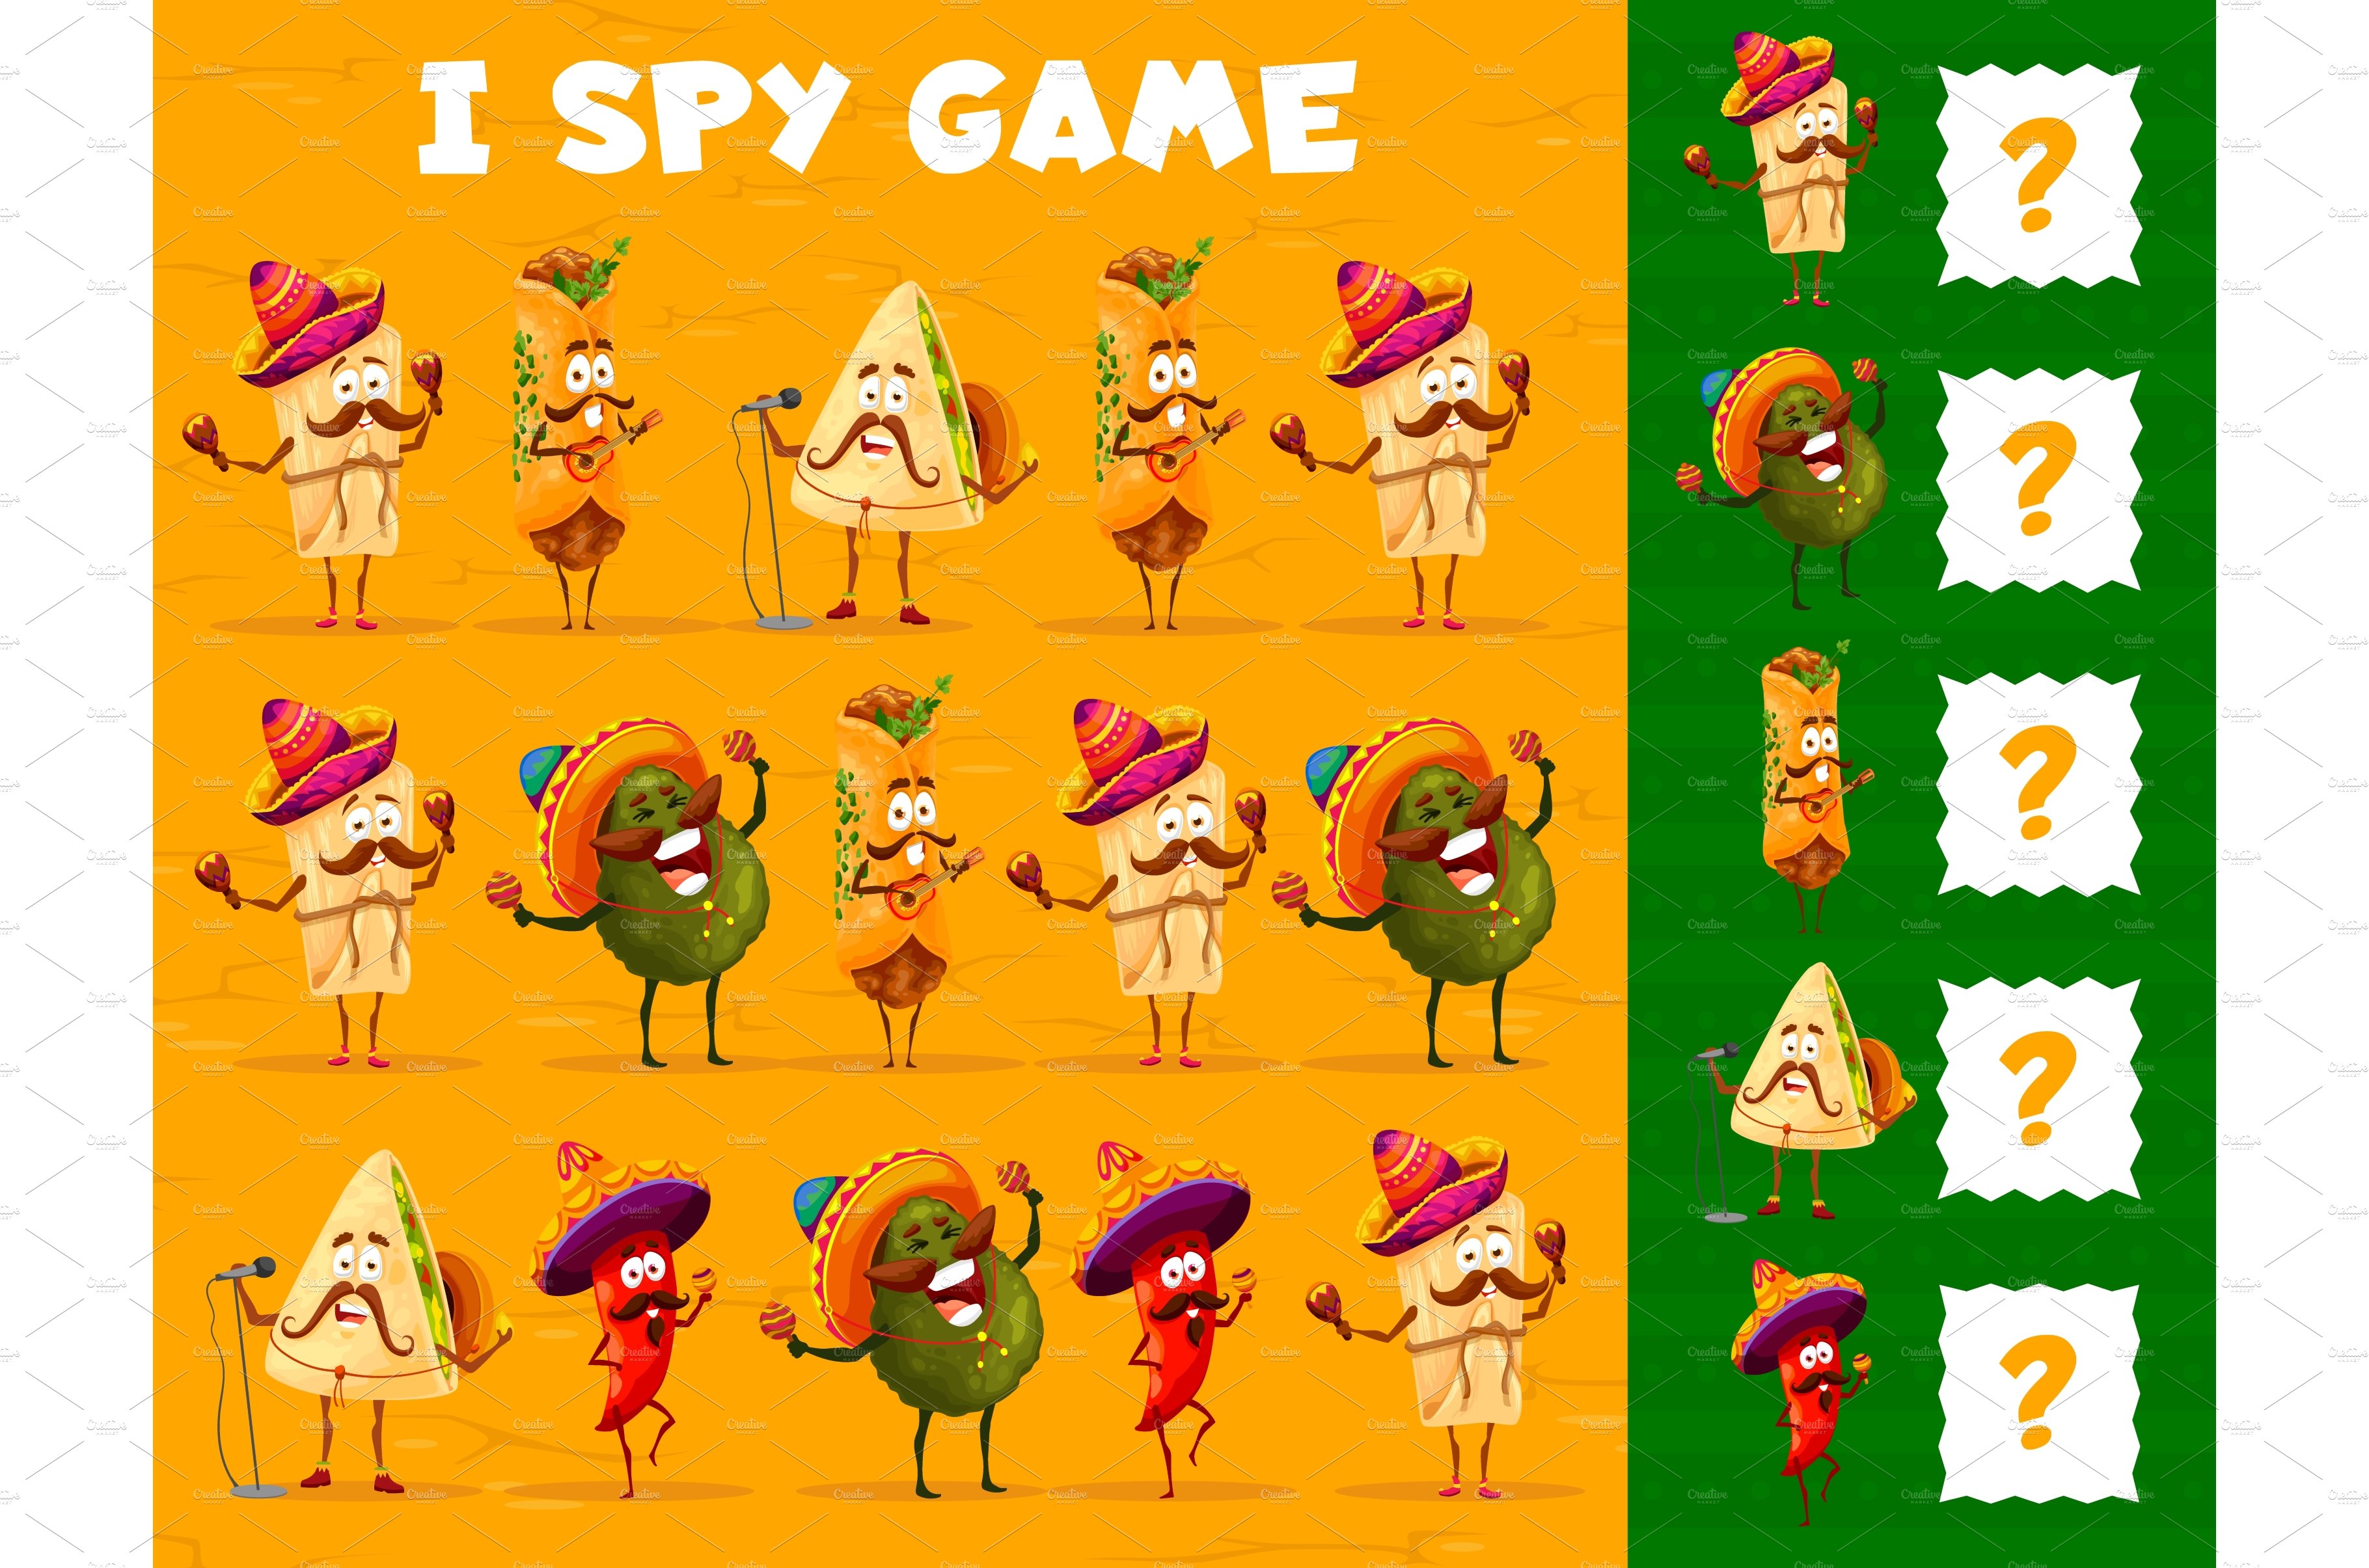 Mexican characters, I spy game cover image.